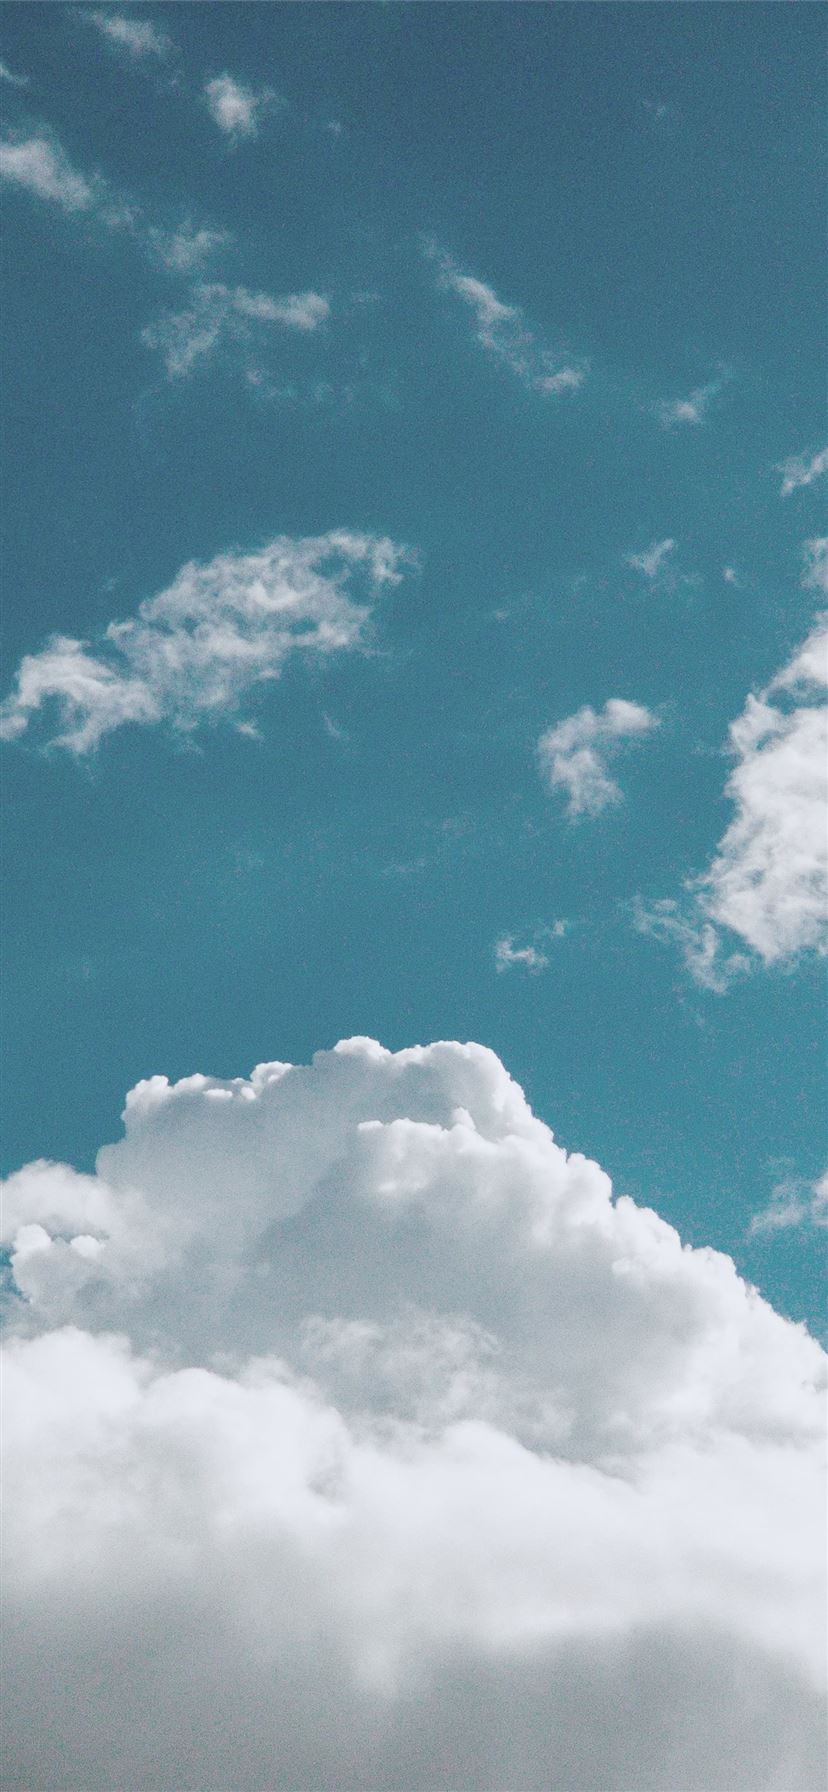 Blue Sky And White Clouds iPhone Wallpaper